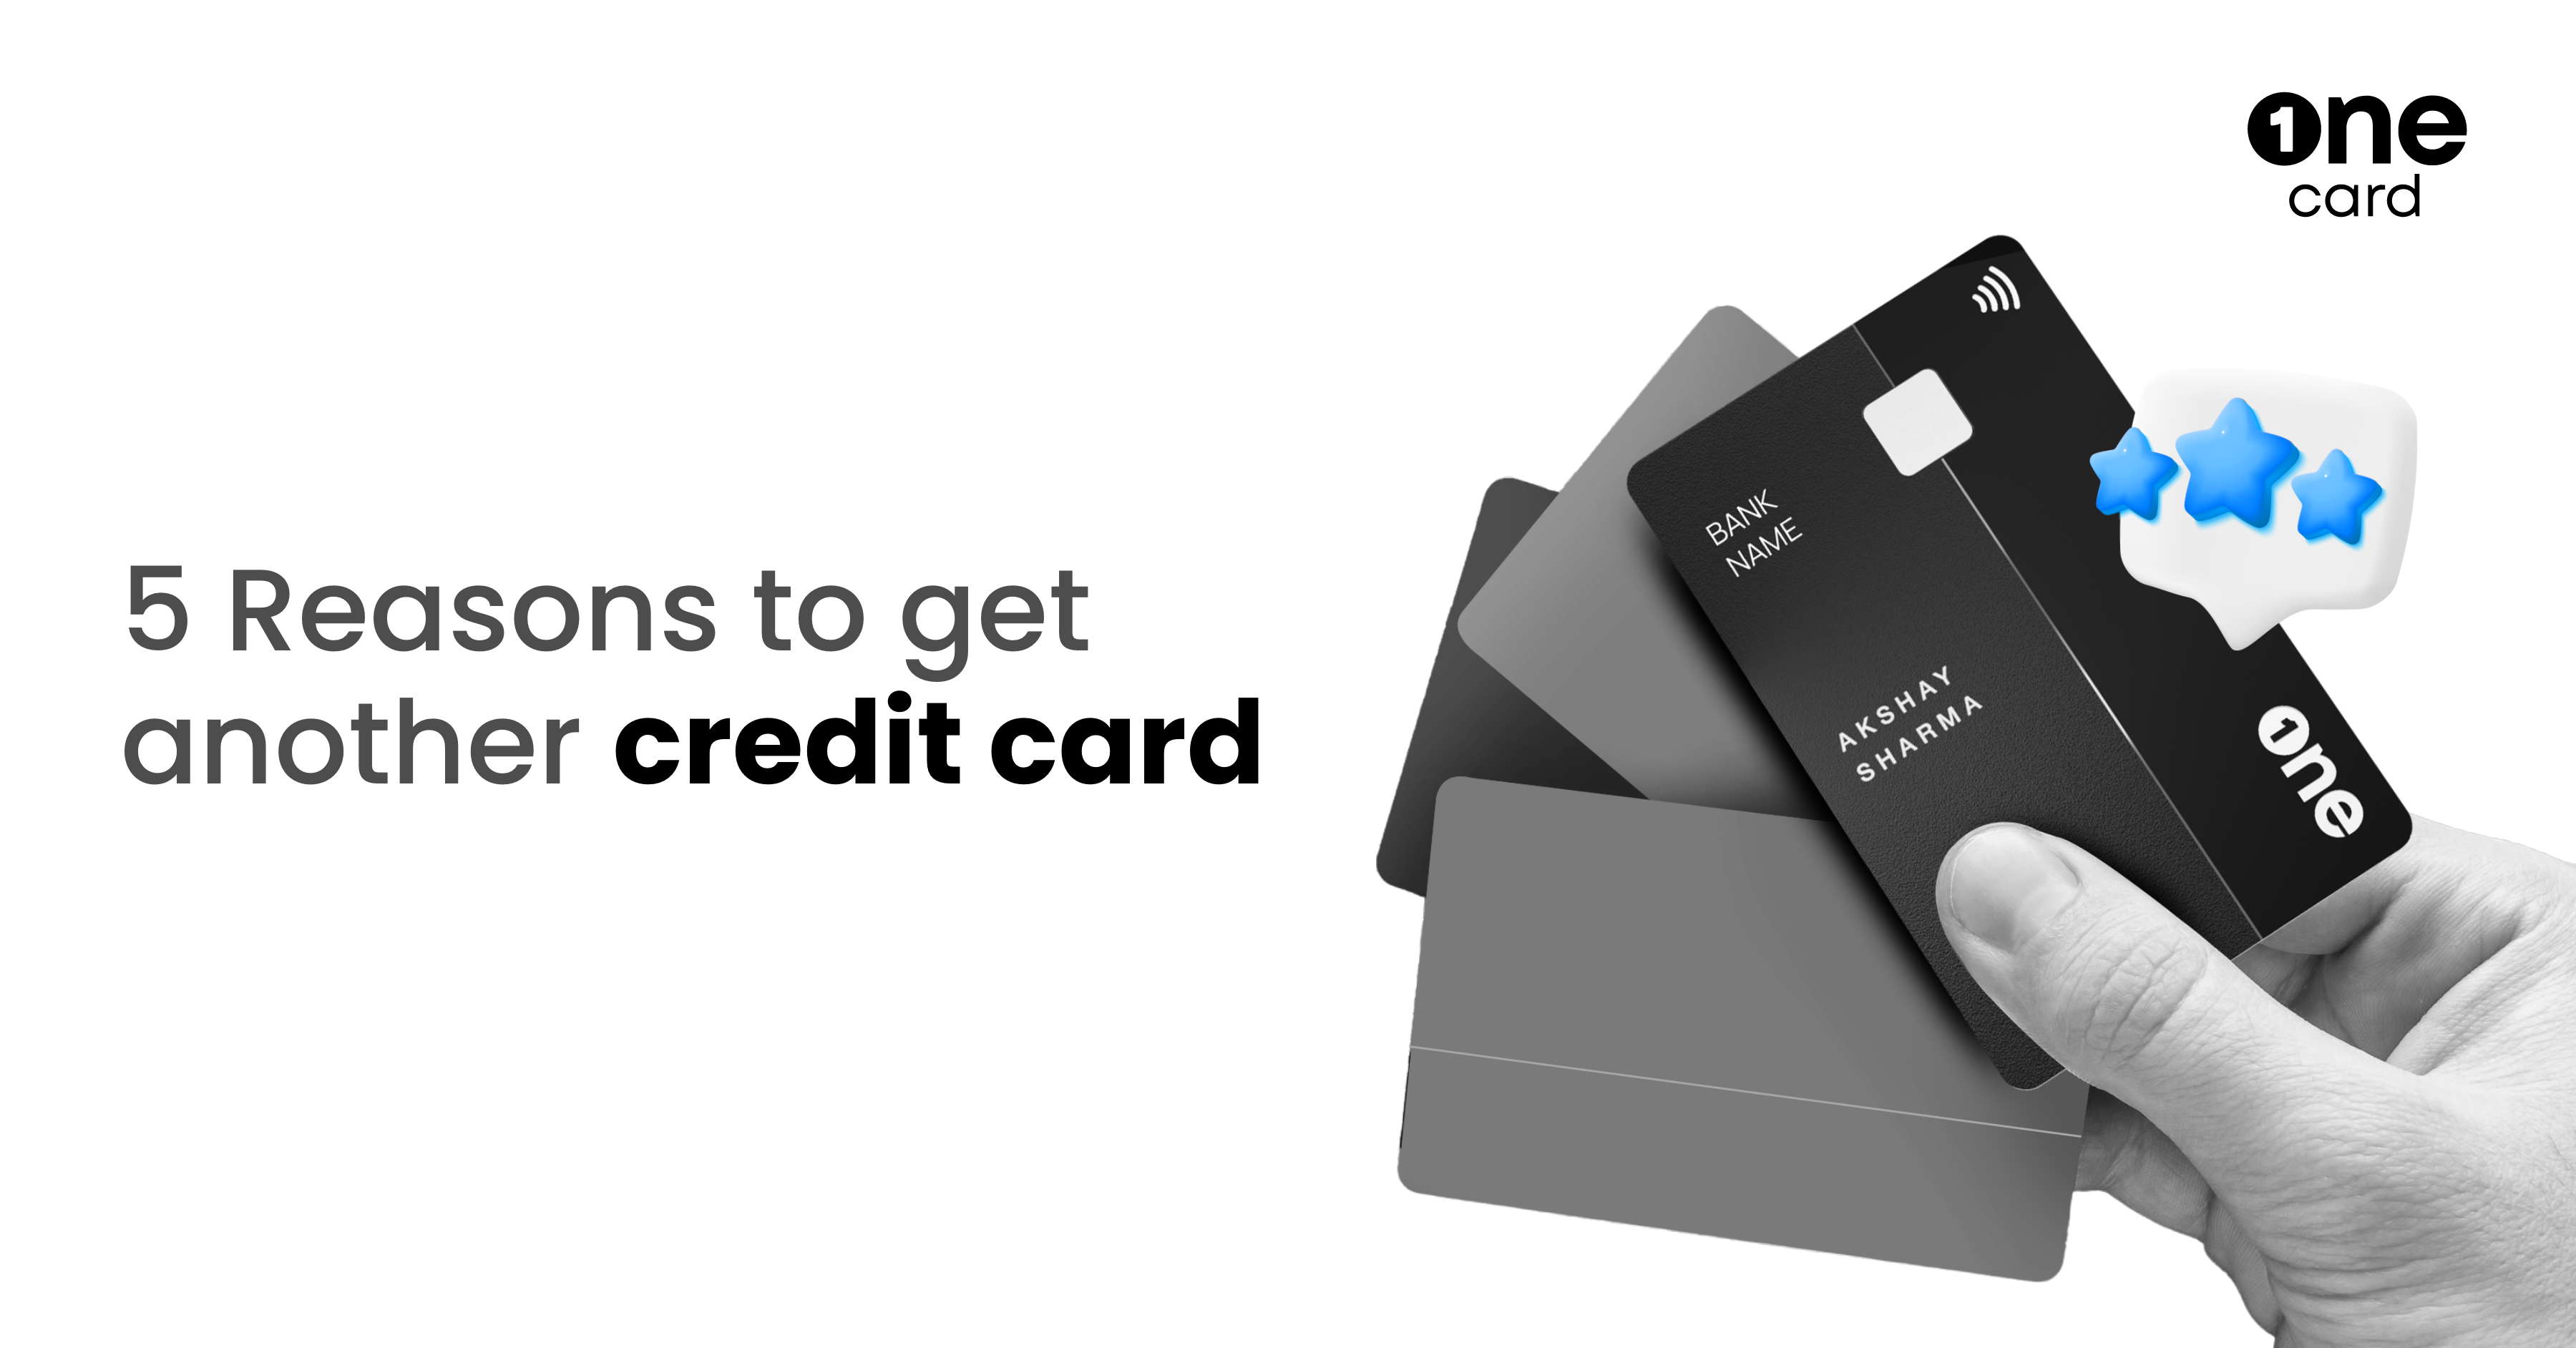 Why Should You Get Another Credit Card?